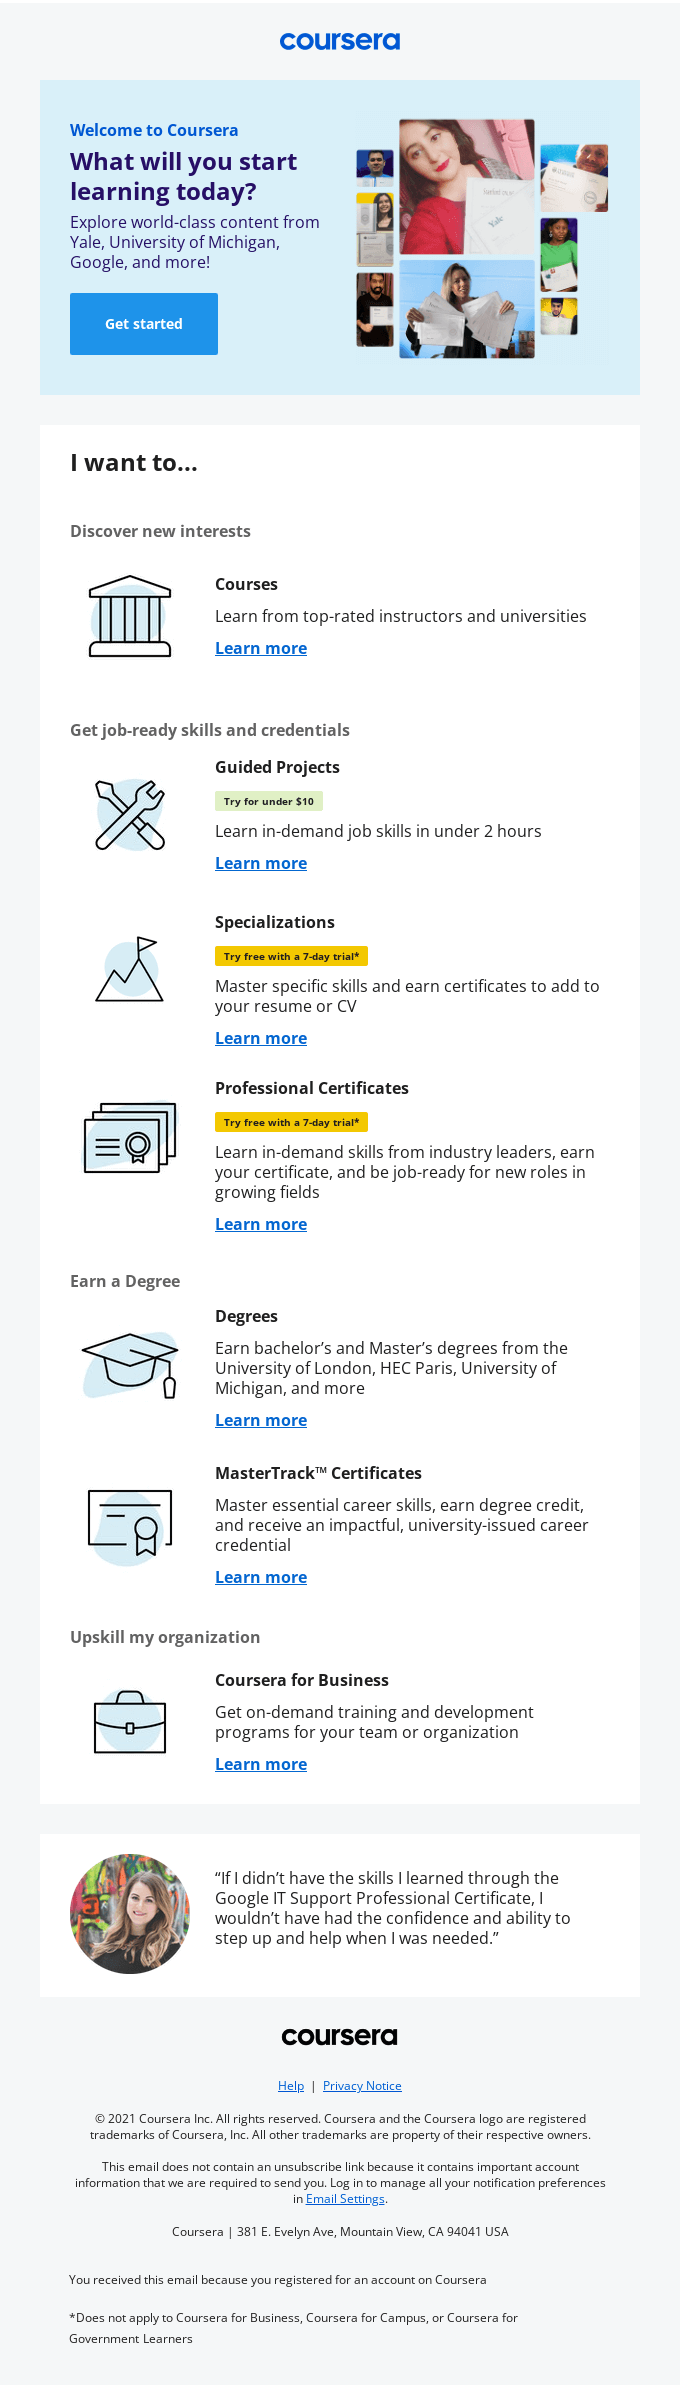 How to get started with Coursera